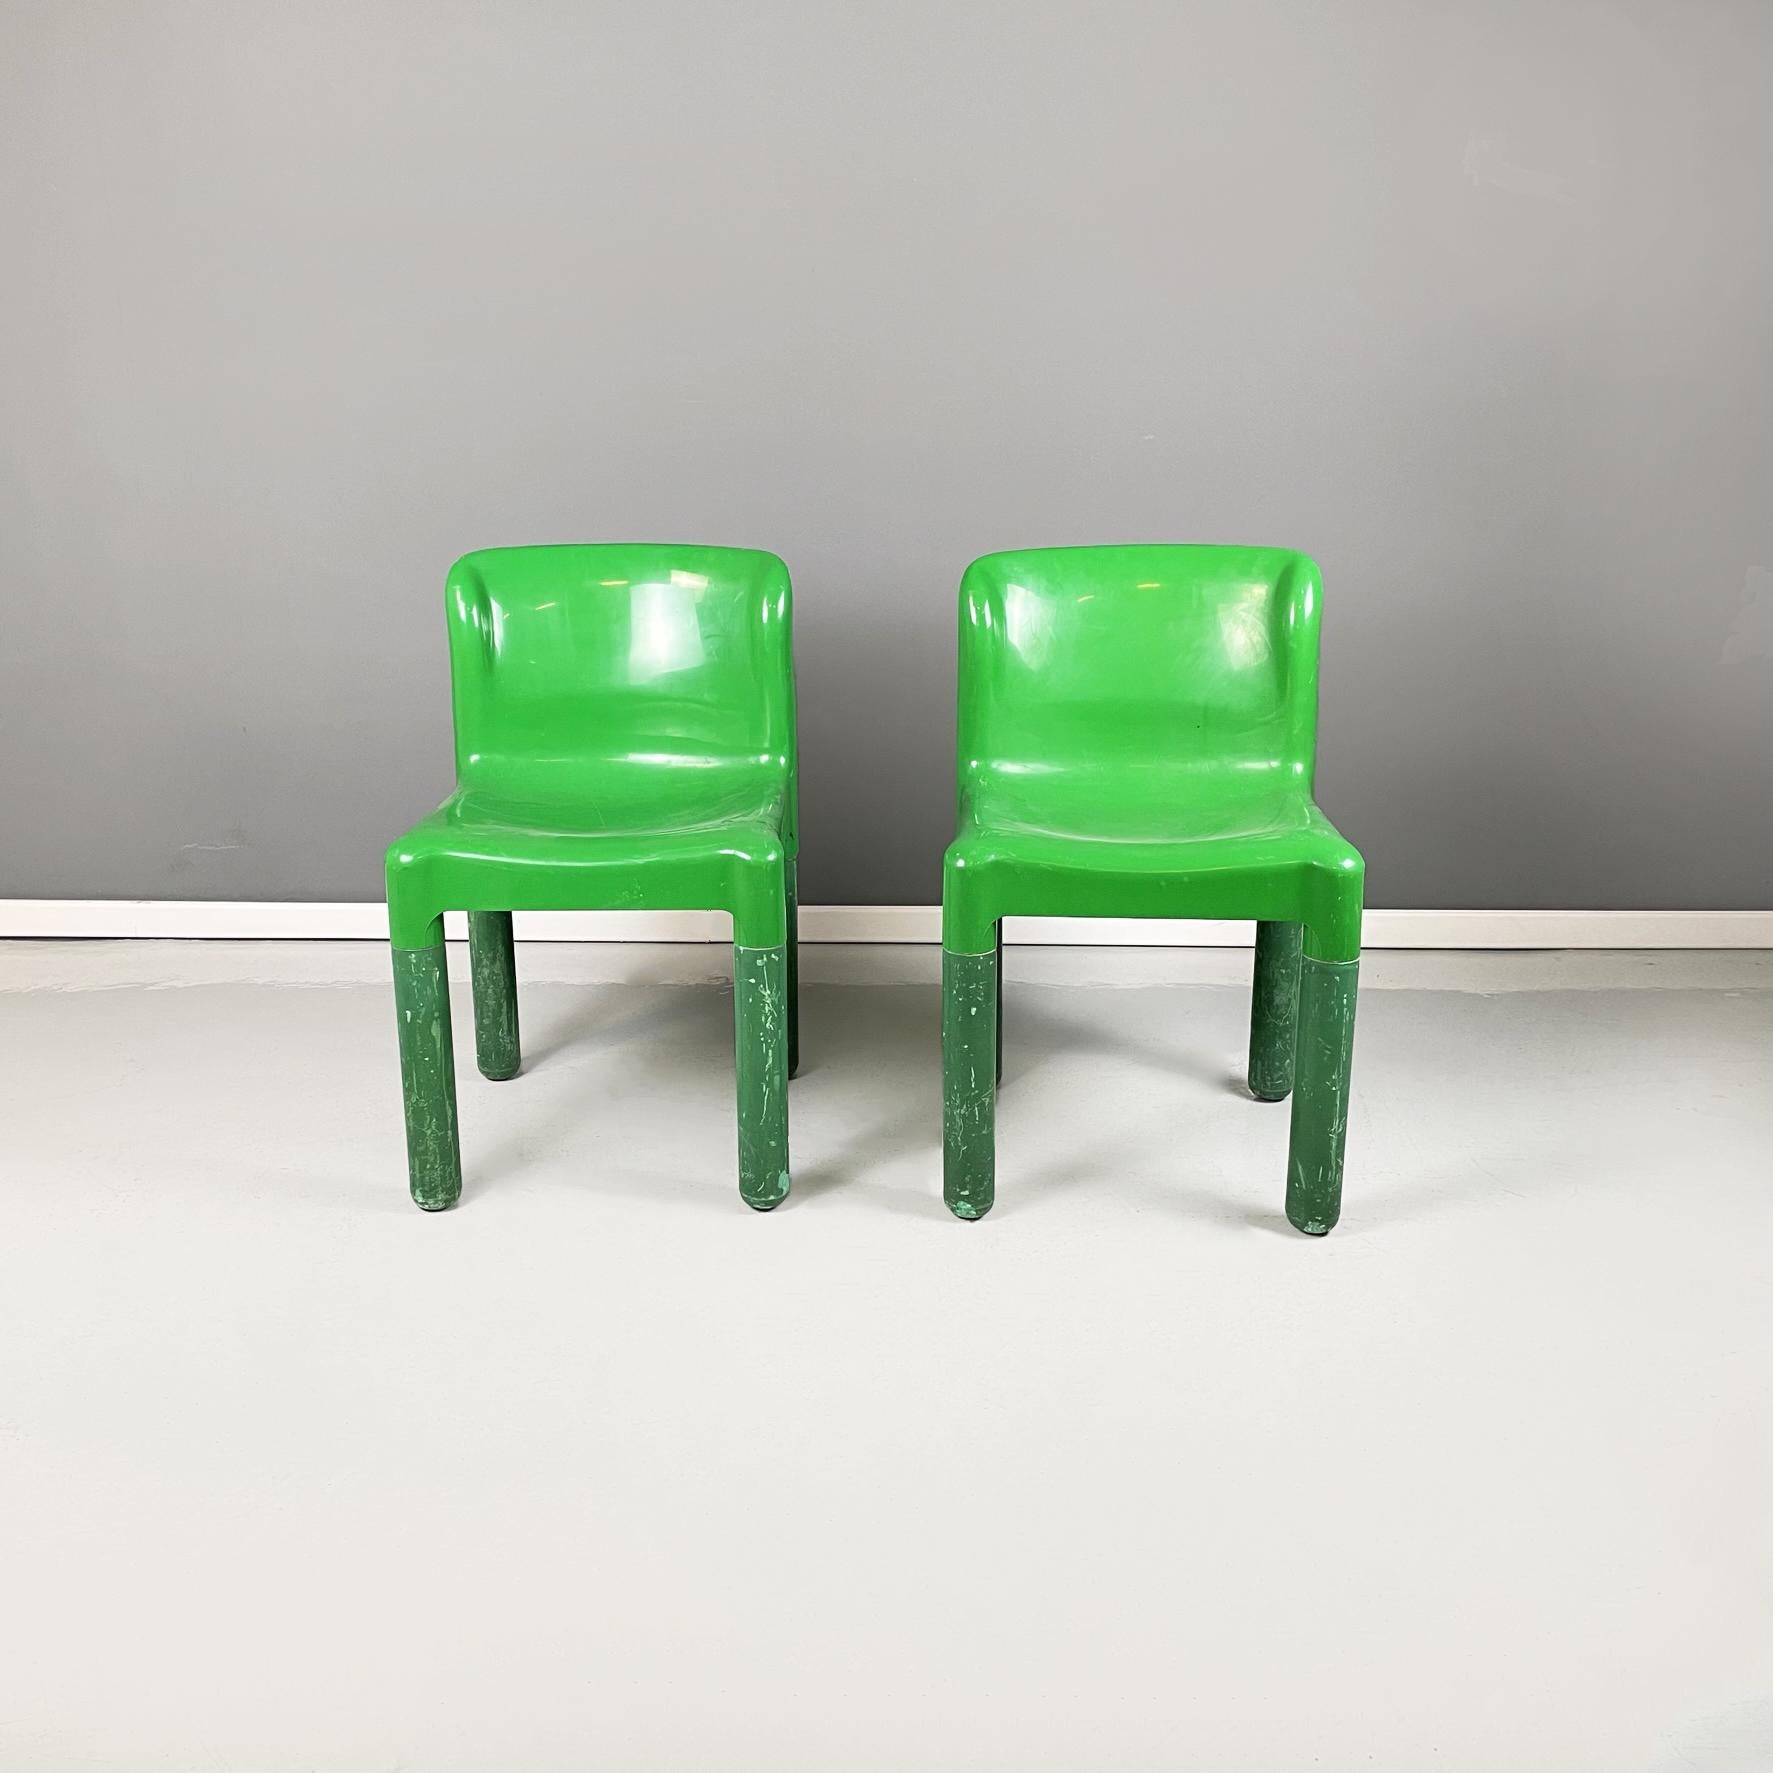 Italian Space Age green plastic chairs mod. 4875 by Carlo Bartoli for Kartell, 1970s
Pair of chairs mod. 4875 with rounded seat and back, in bright green plastic. The round section chair legs are removable.
They were produced by Kartell in 1970s